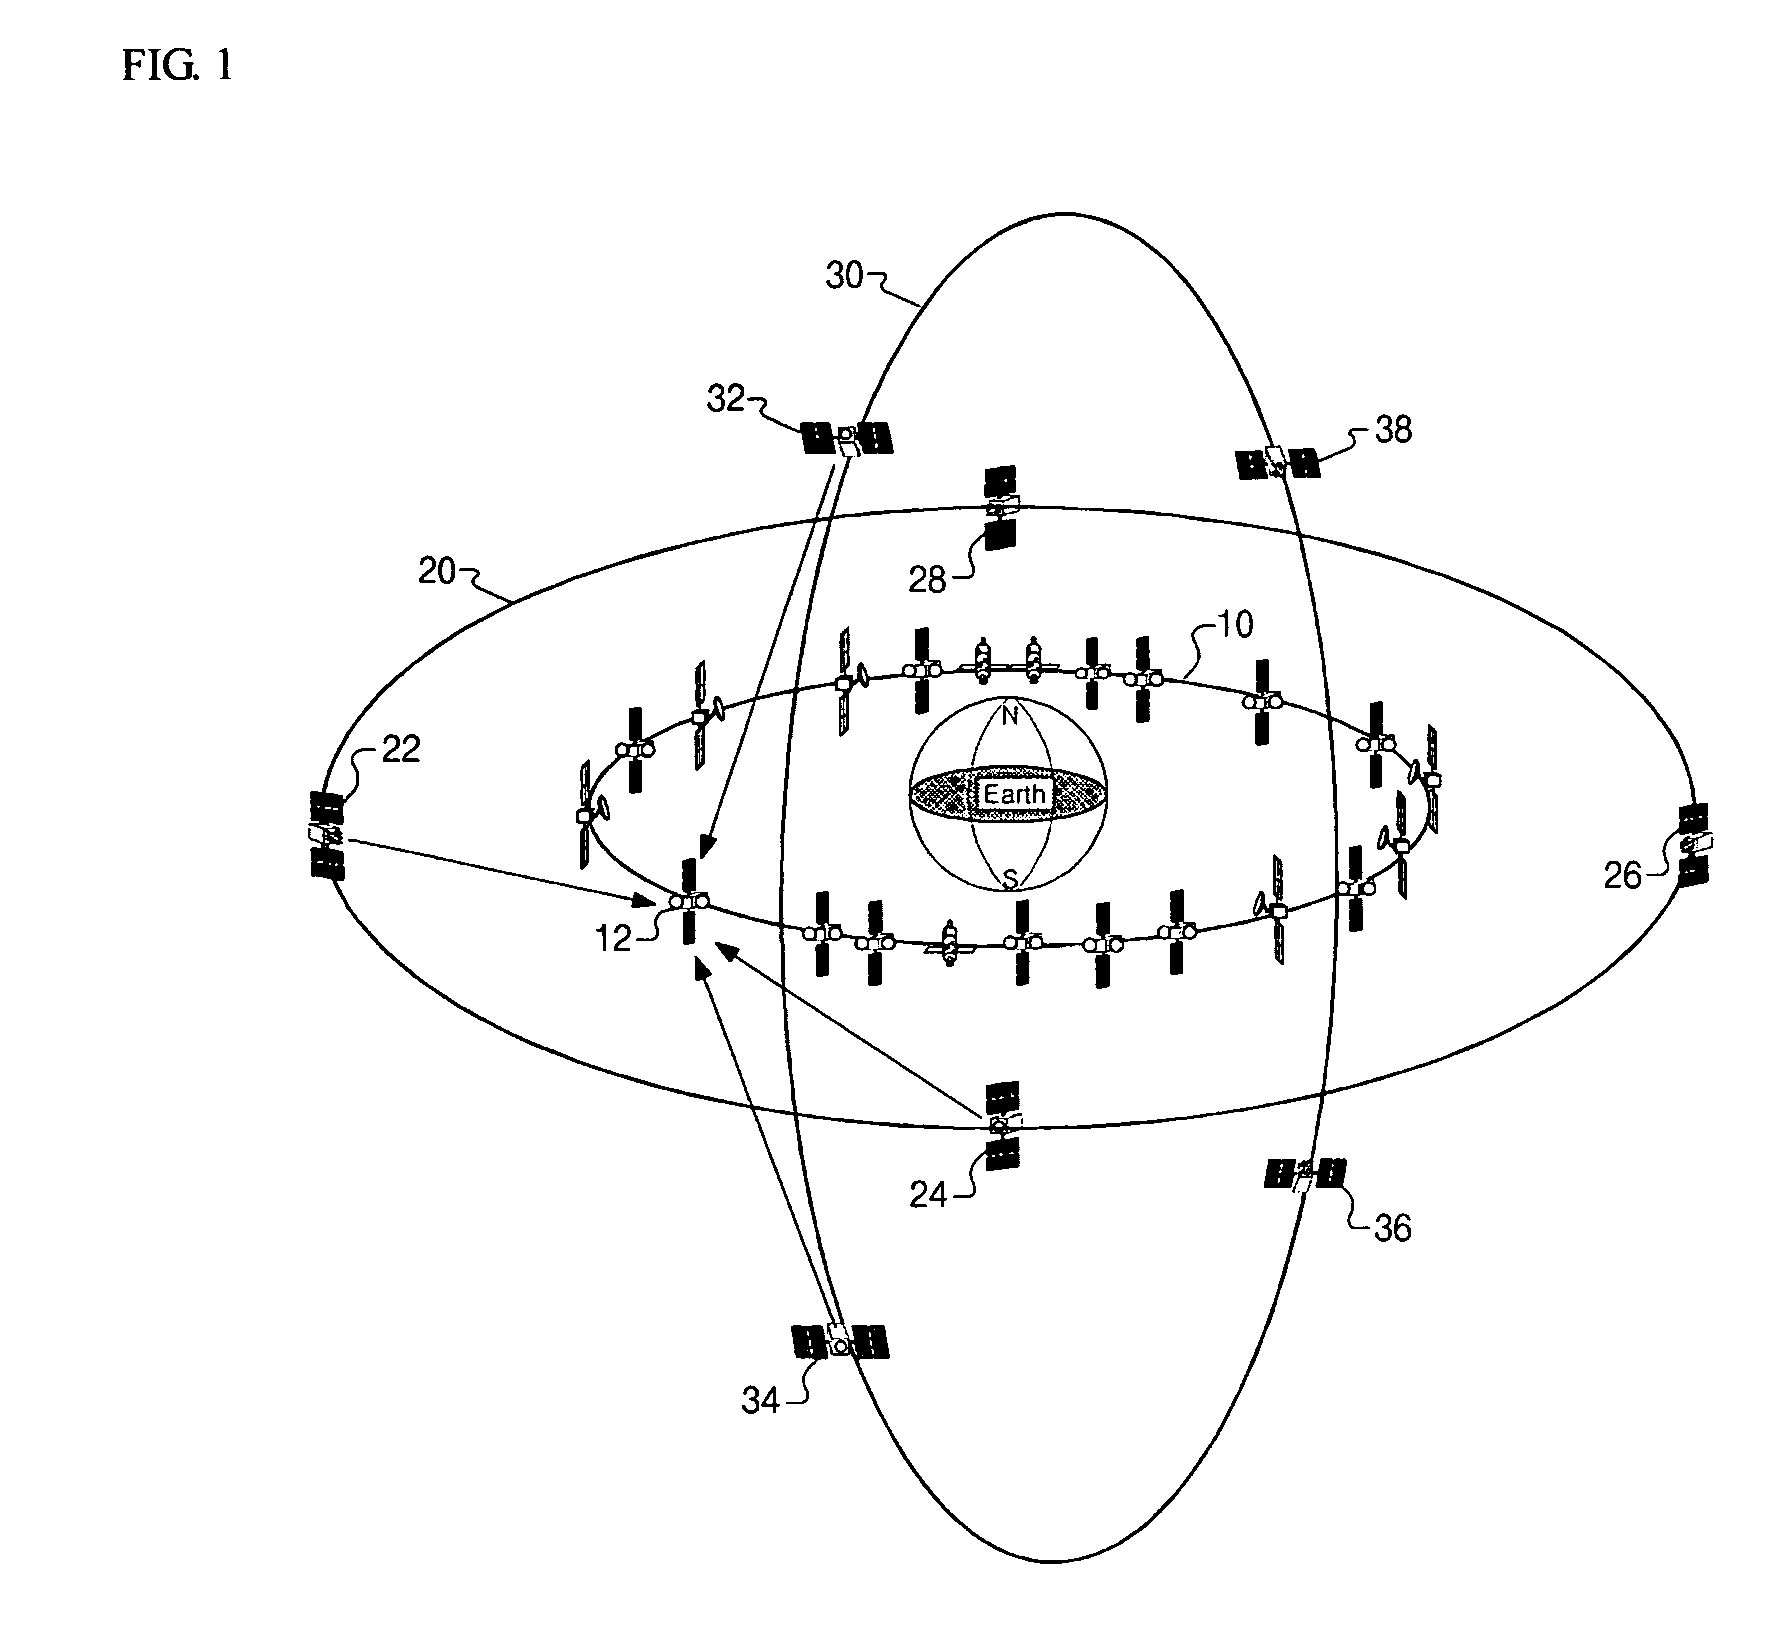 Positioning system for a geostationary satellite